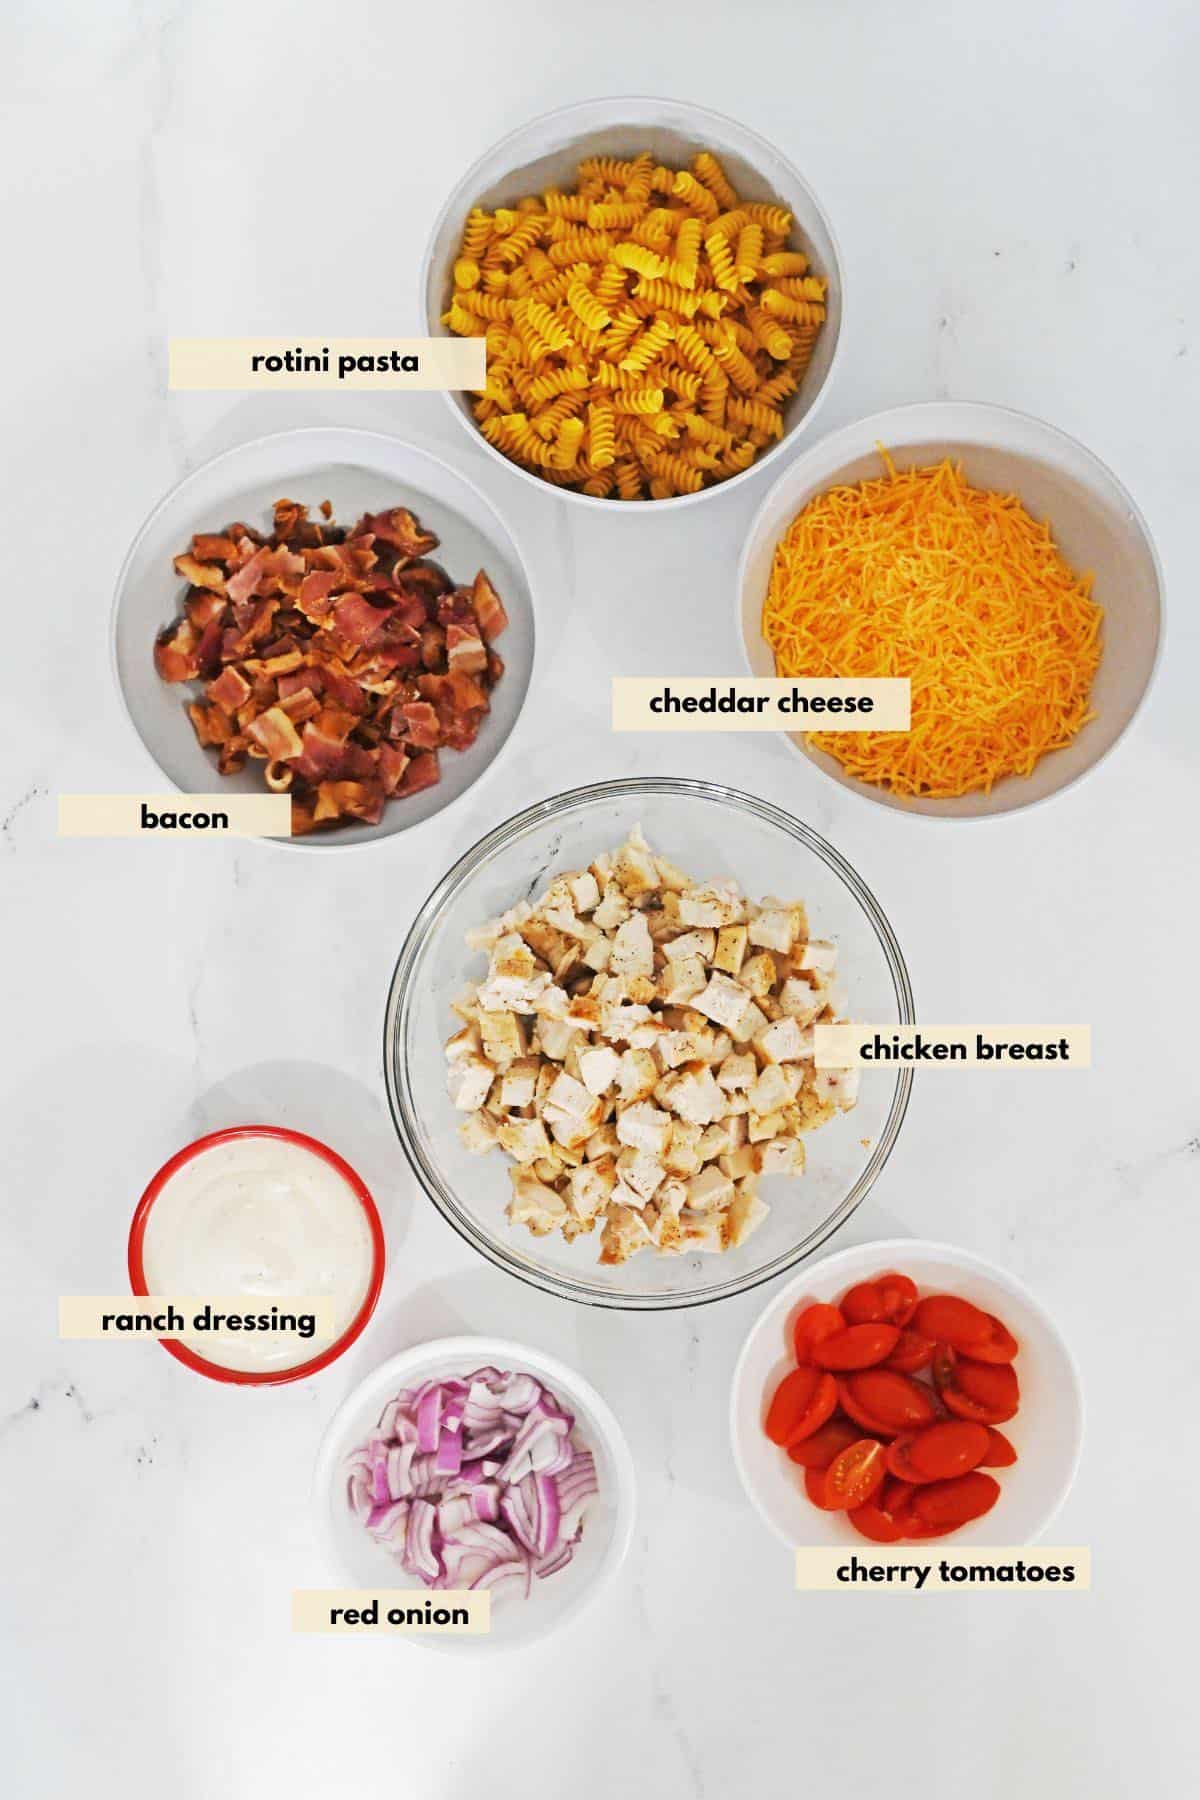 Ingredients to make pasta salad with ranch dressing, bacon, red onion, tomatoes, cheddar cheese, rotini pasta.